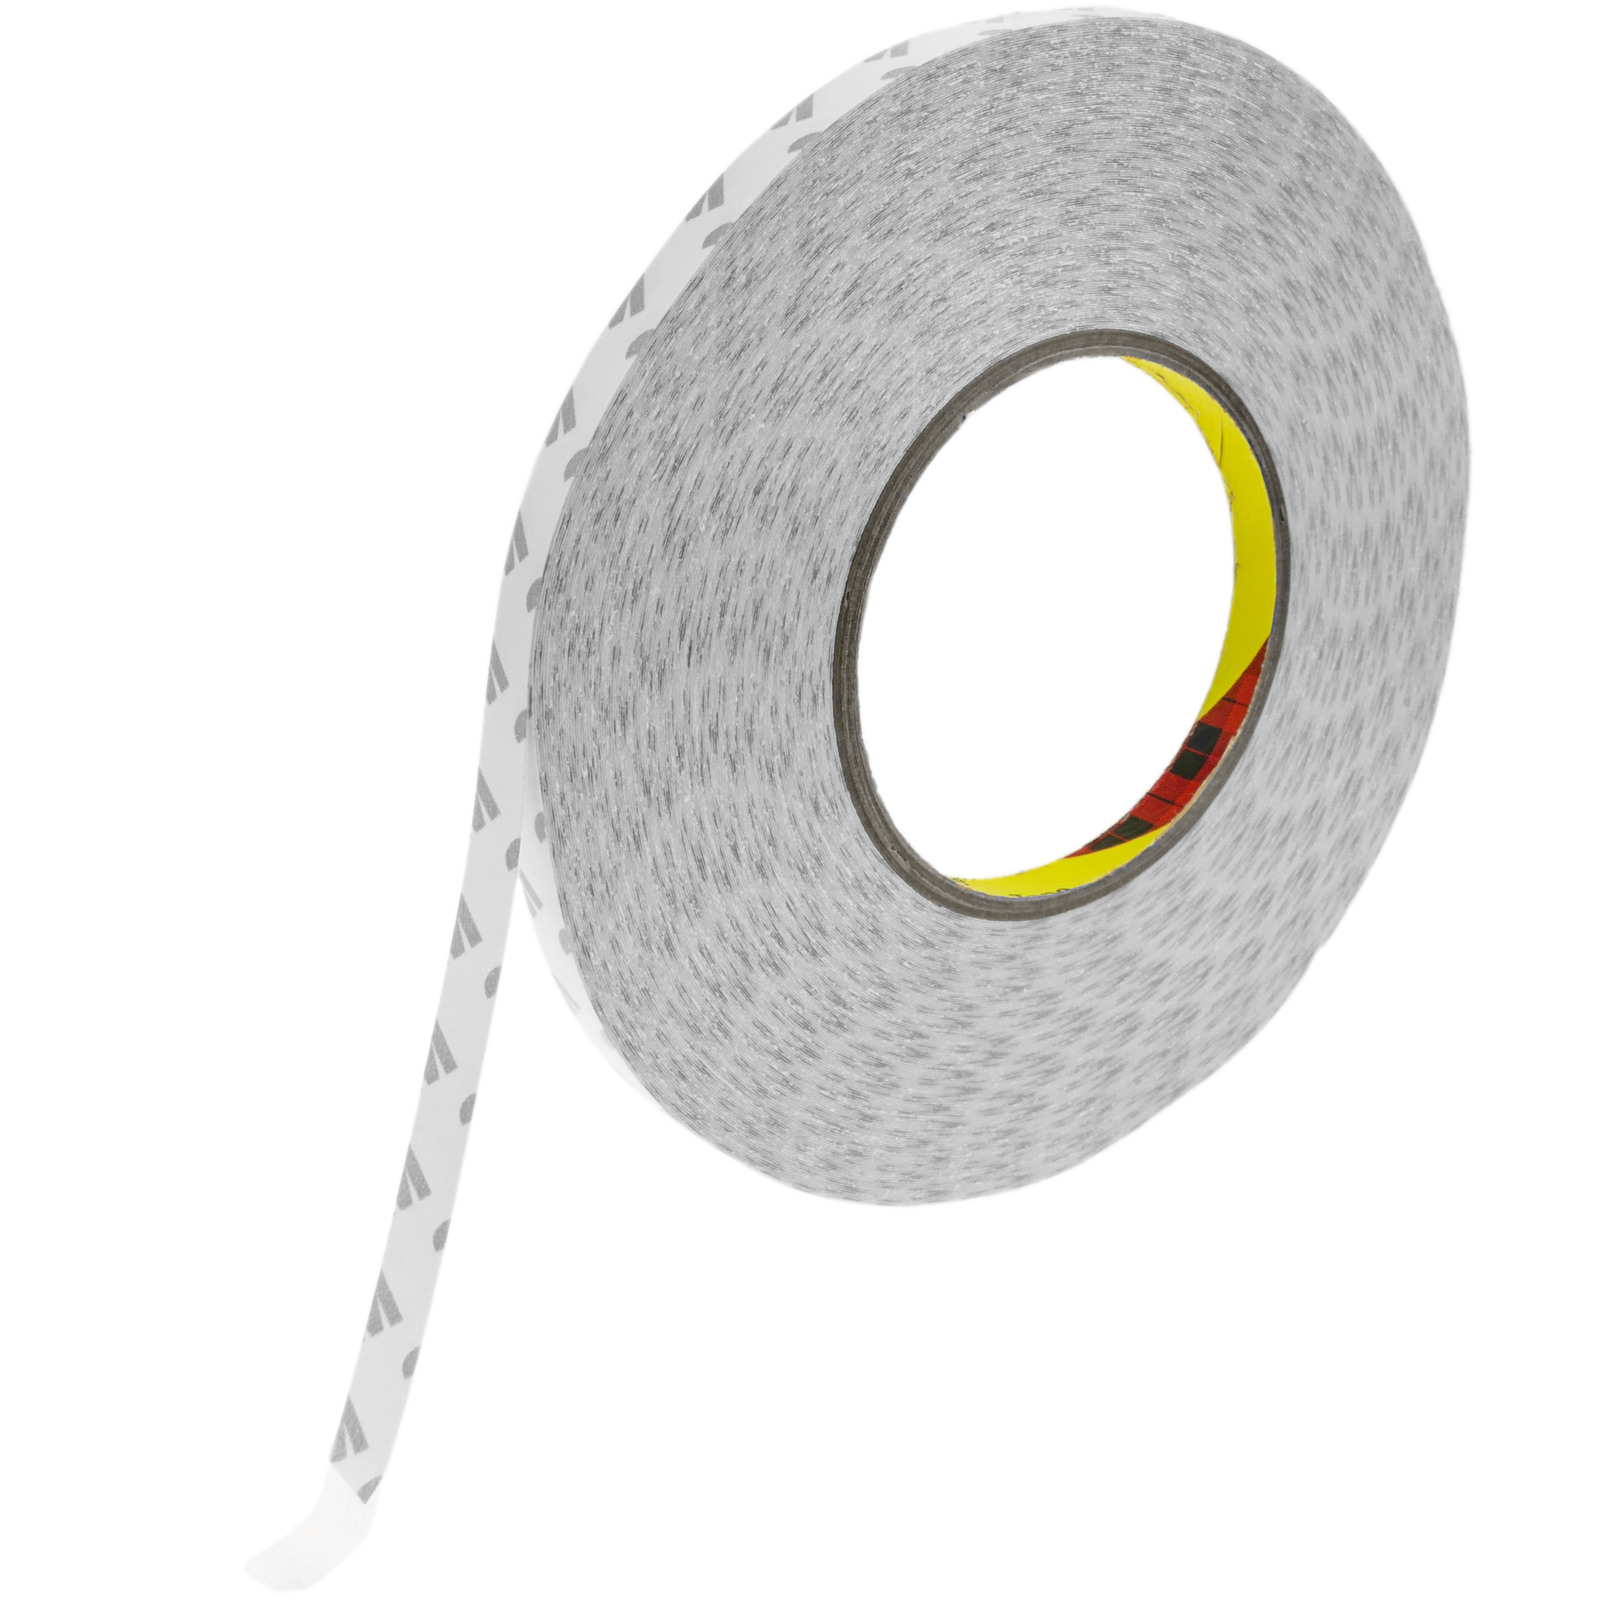 Double Face scotch brand tape 3m White 12mm 10 meter